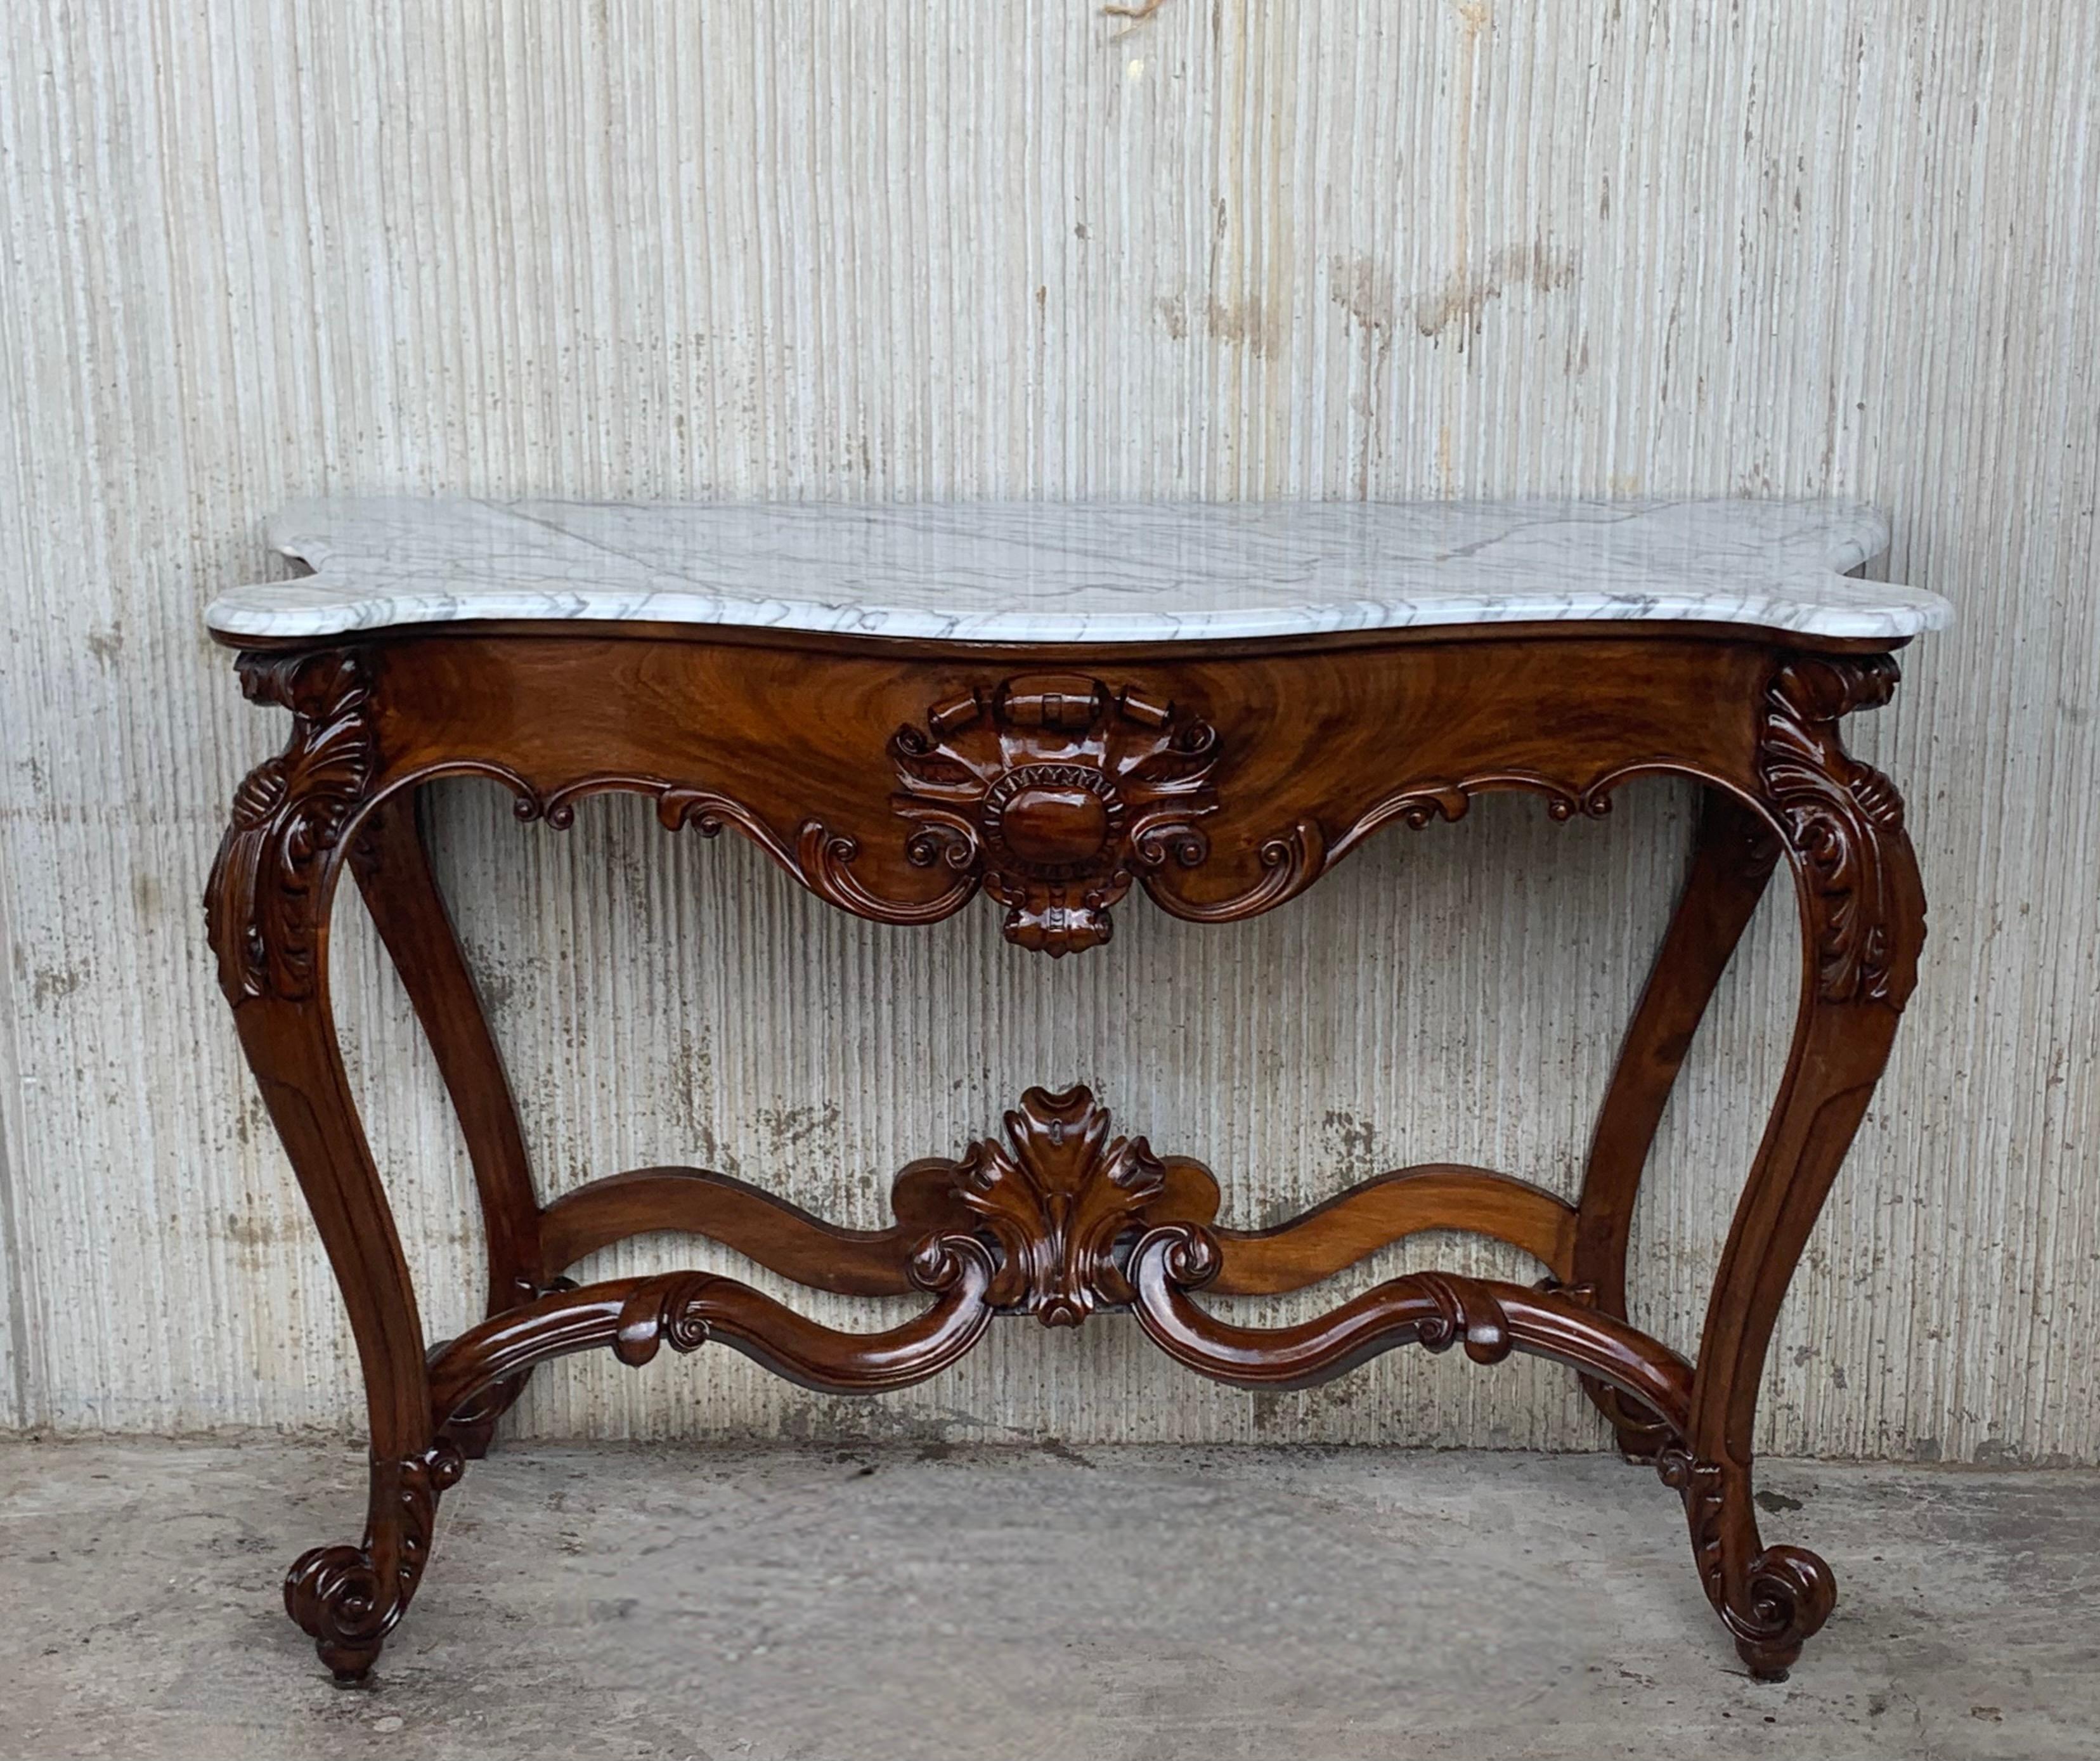  Large French Regency Carved Walnut Console Table with White Marble Top 12